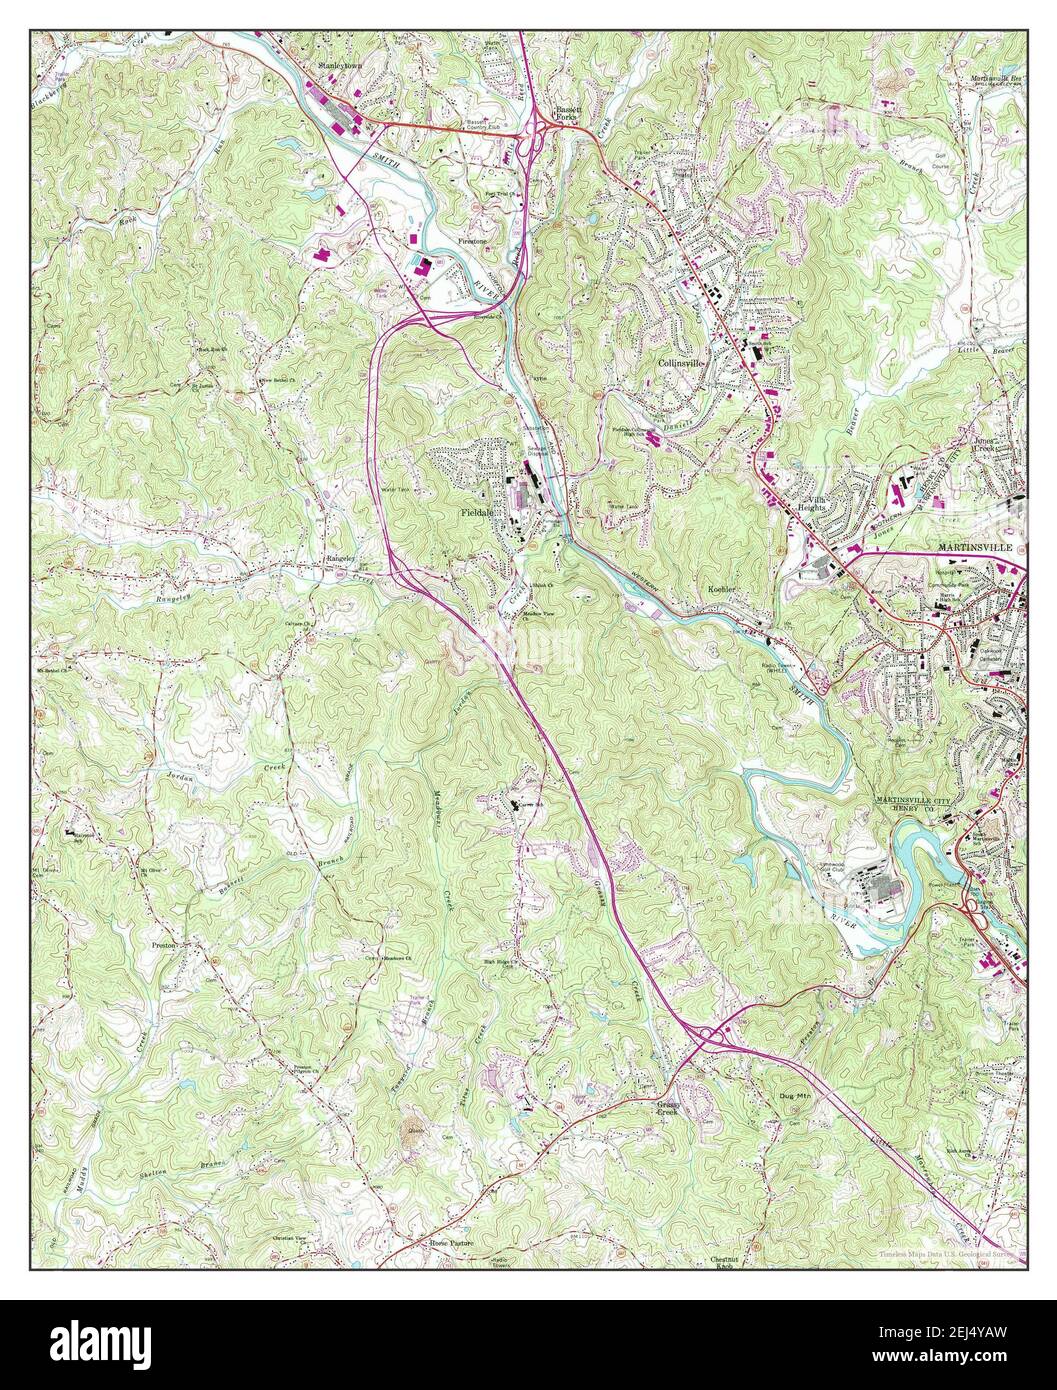 Martinsville West, Virginia, map 1965, 1:24000, United States of America by Timeless Maps, data U.S. Geological Survey Stock Photo